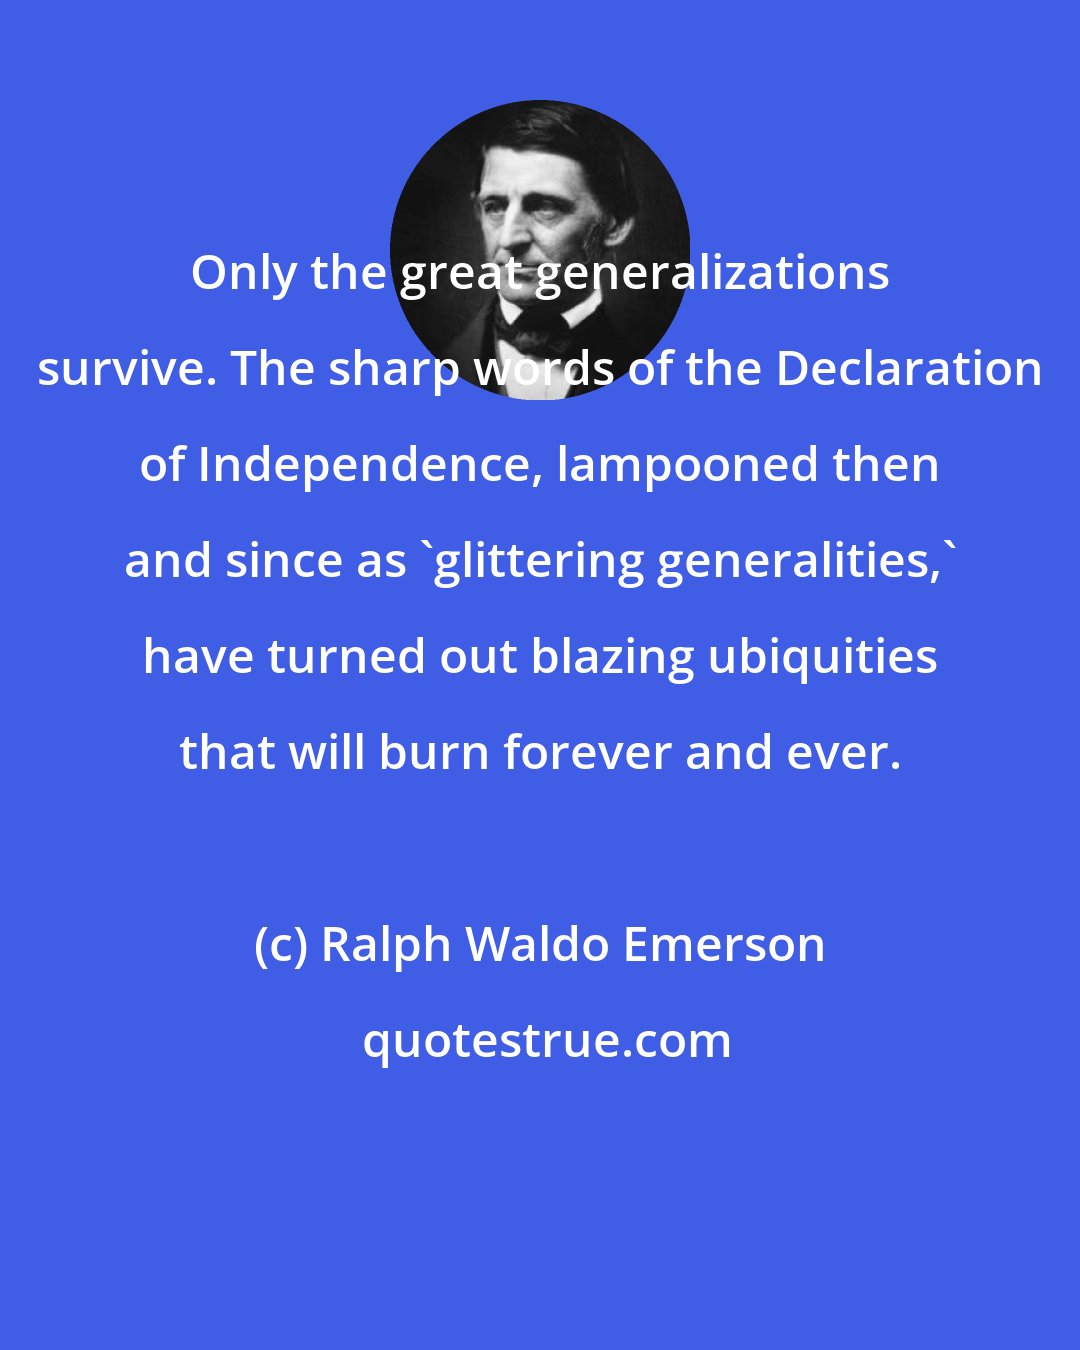 Ralph Waldo Emerson: Only the great generalizations survive. The sharp words of the Declaration of Independence, lampooned then and since as 'glittering generalities,' have turned out blazing ubiquities that will burn forever and ever.